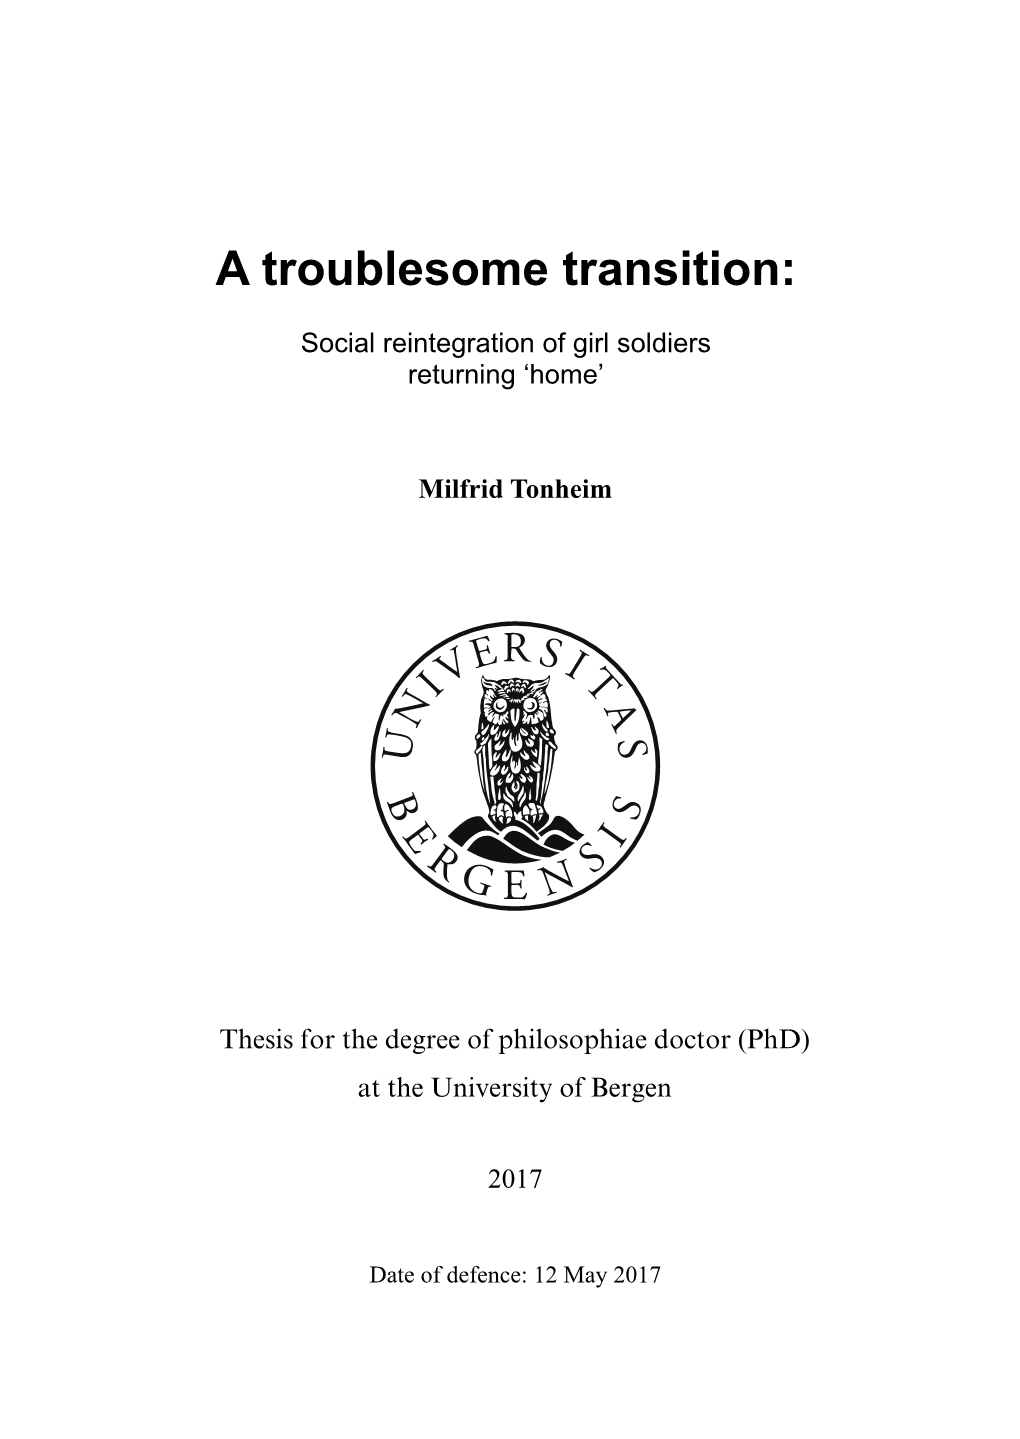 Thesis for the Degree of Philosophiae Doctor (Phd) at the University of Bergen